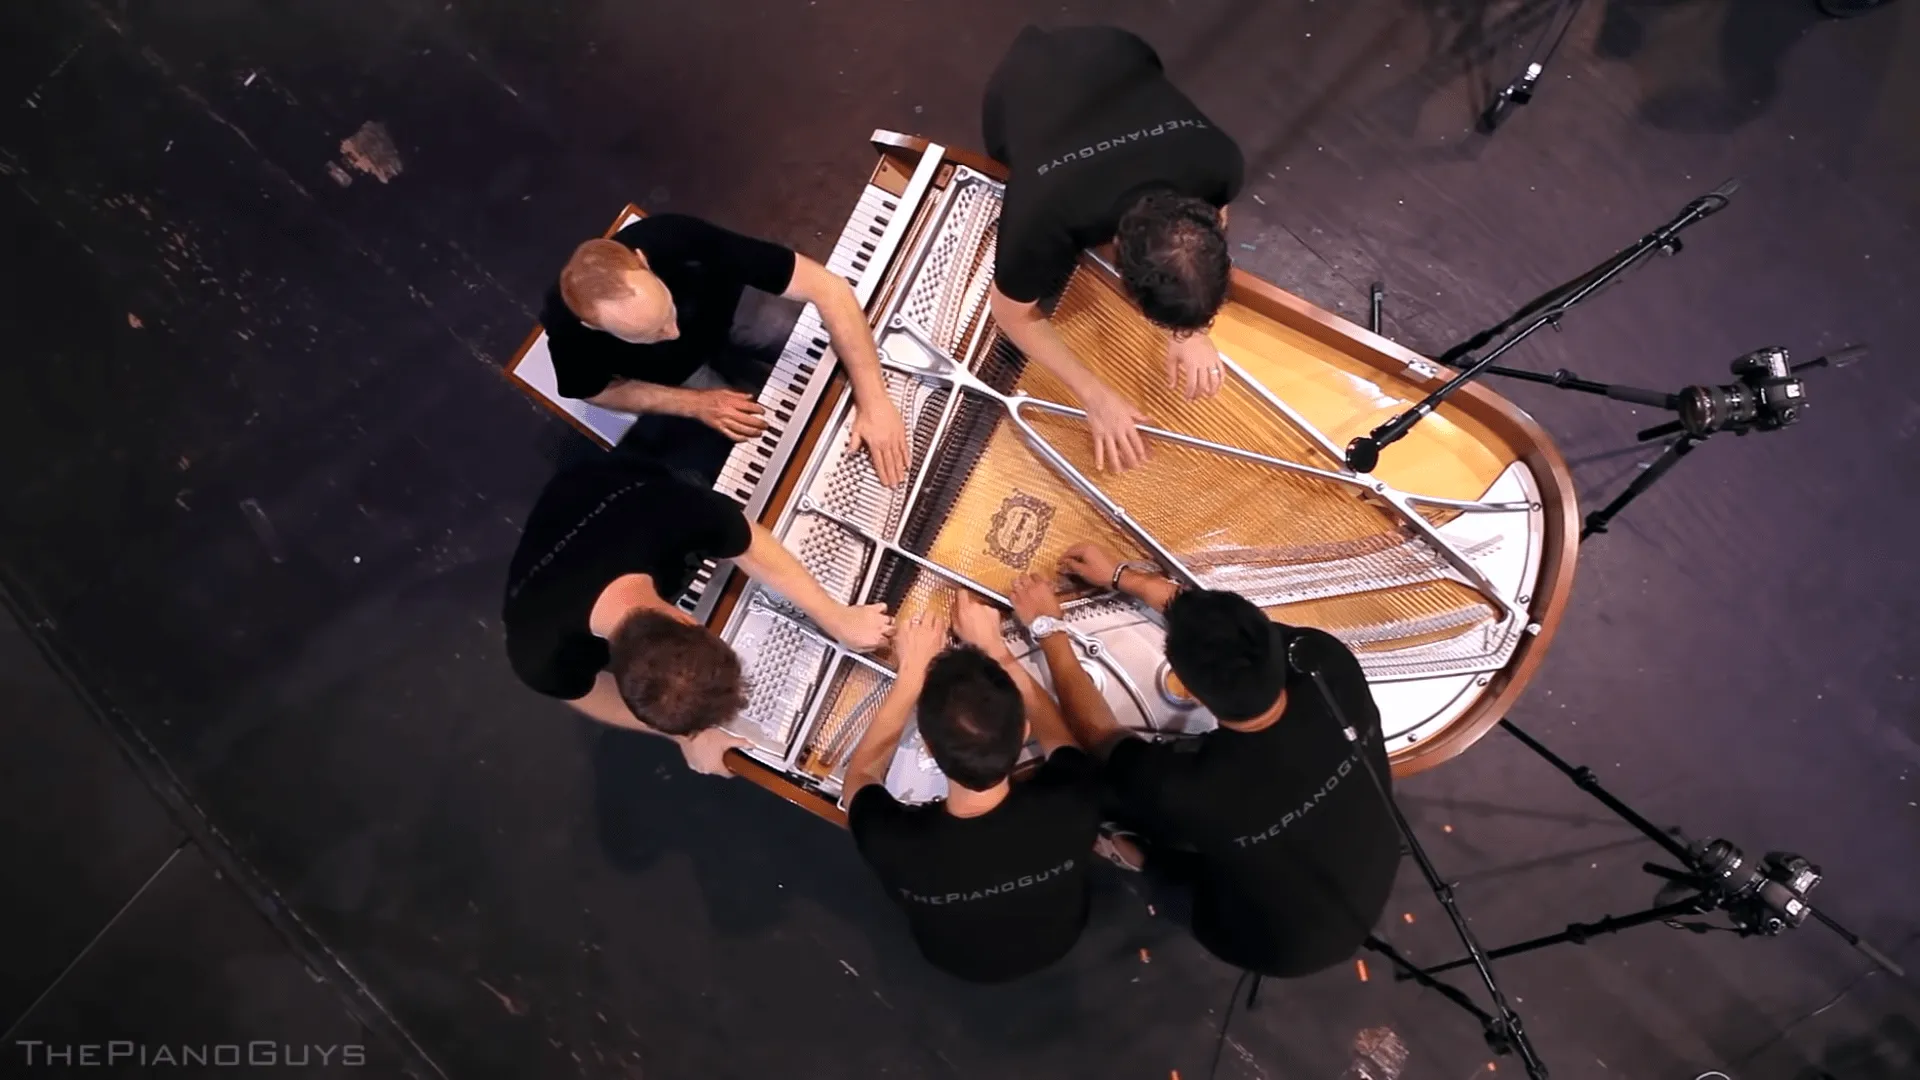 Piano Guys Create Cinematic Cover In The Most Unusual The Music Man